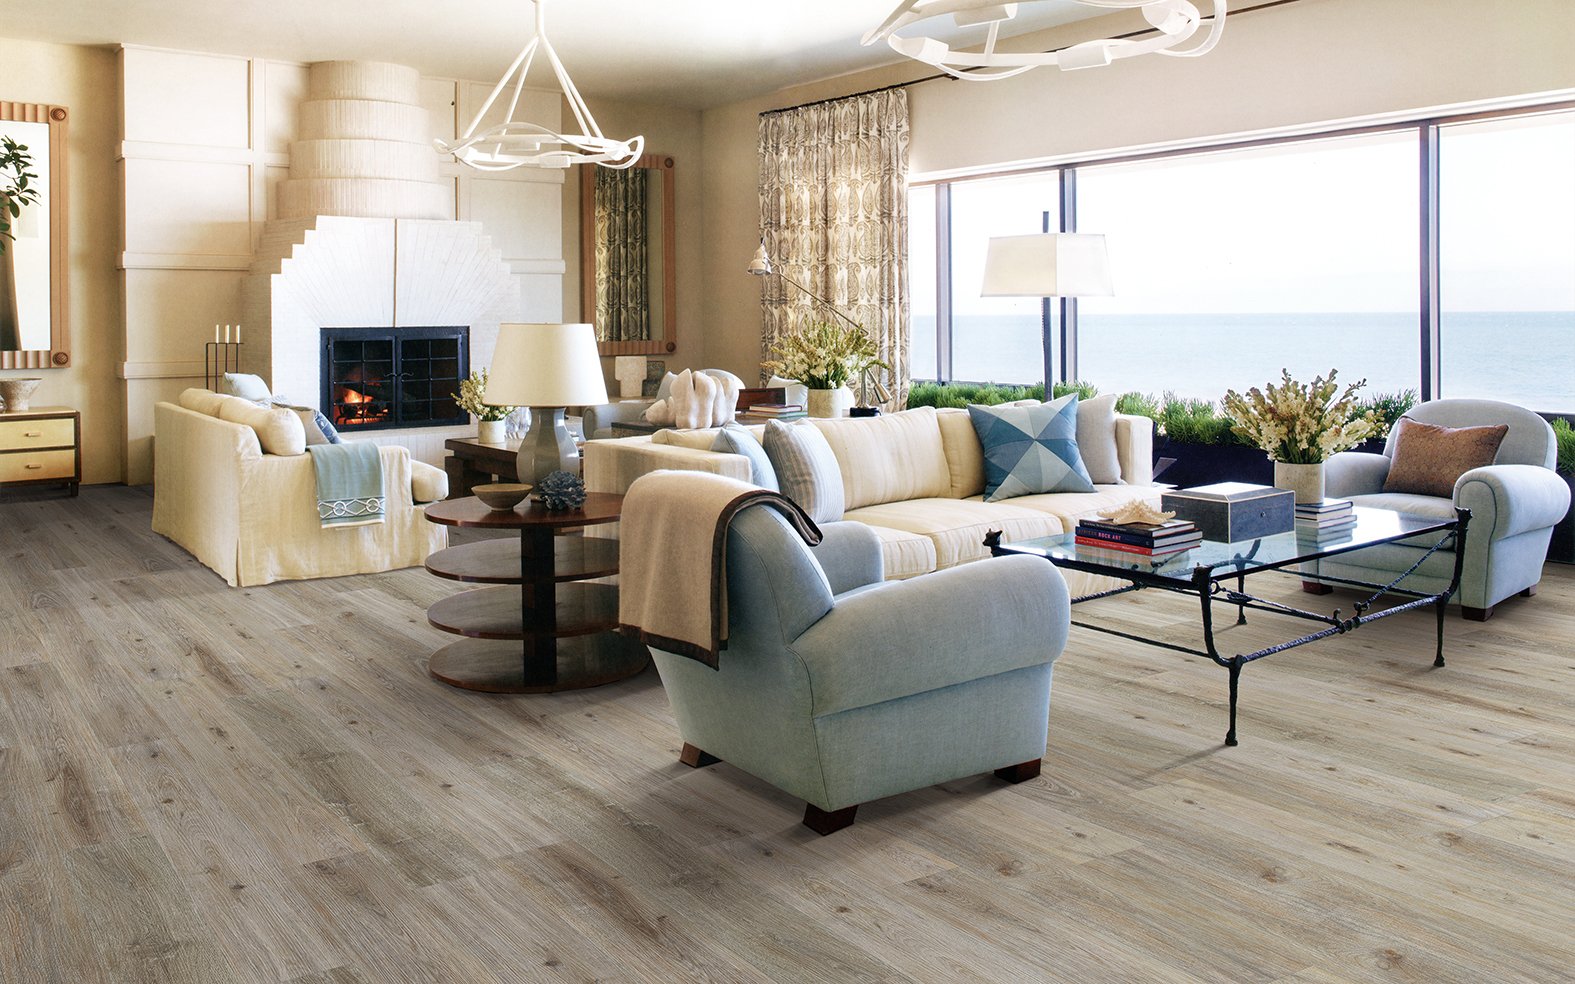 Wrap Up Home Flooring For Christmas